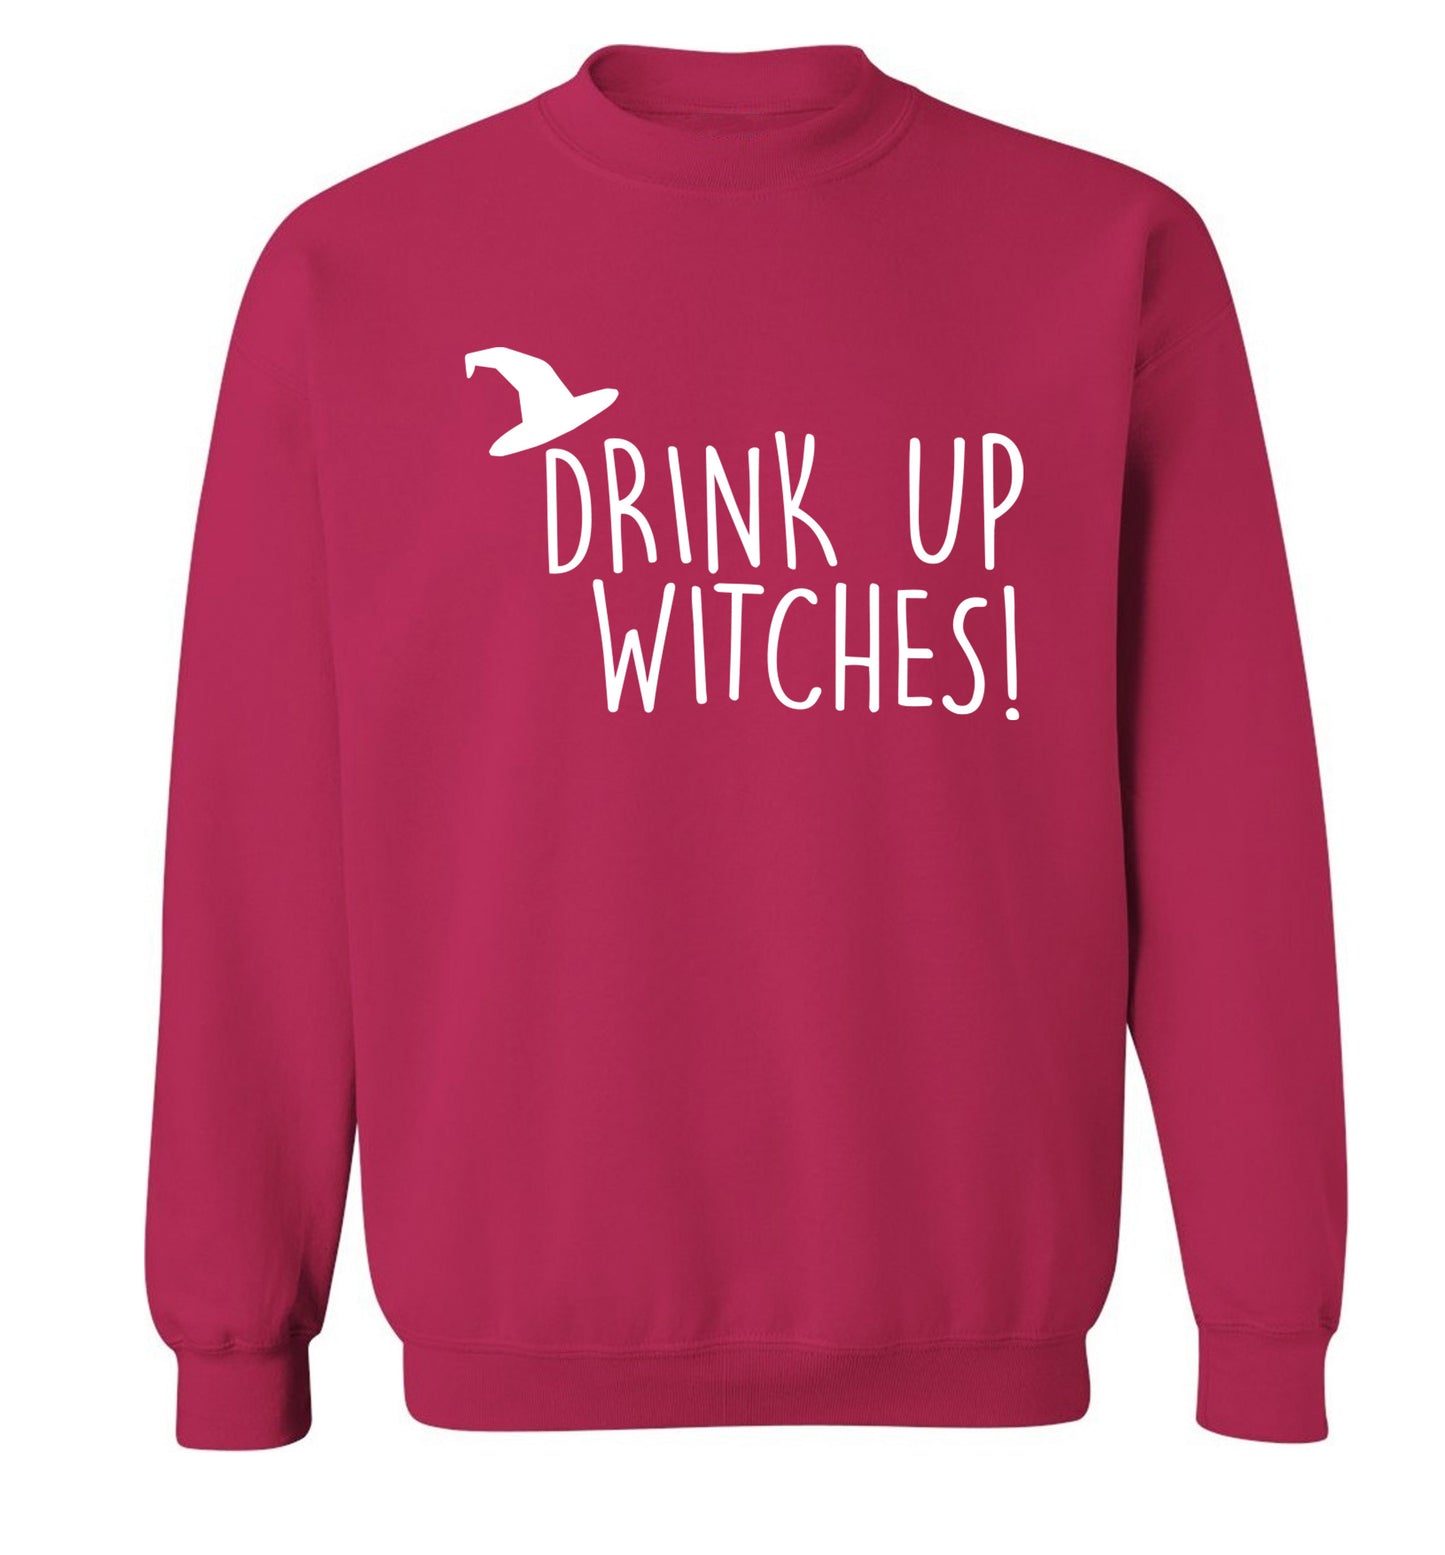 Drink up witches Adult's unisex pink Sweater 2XL